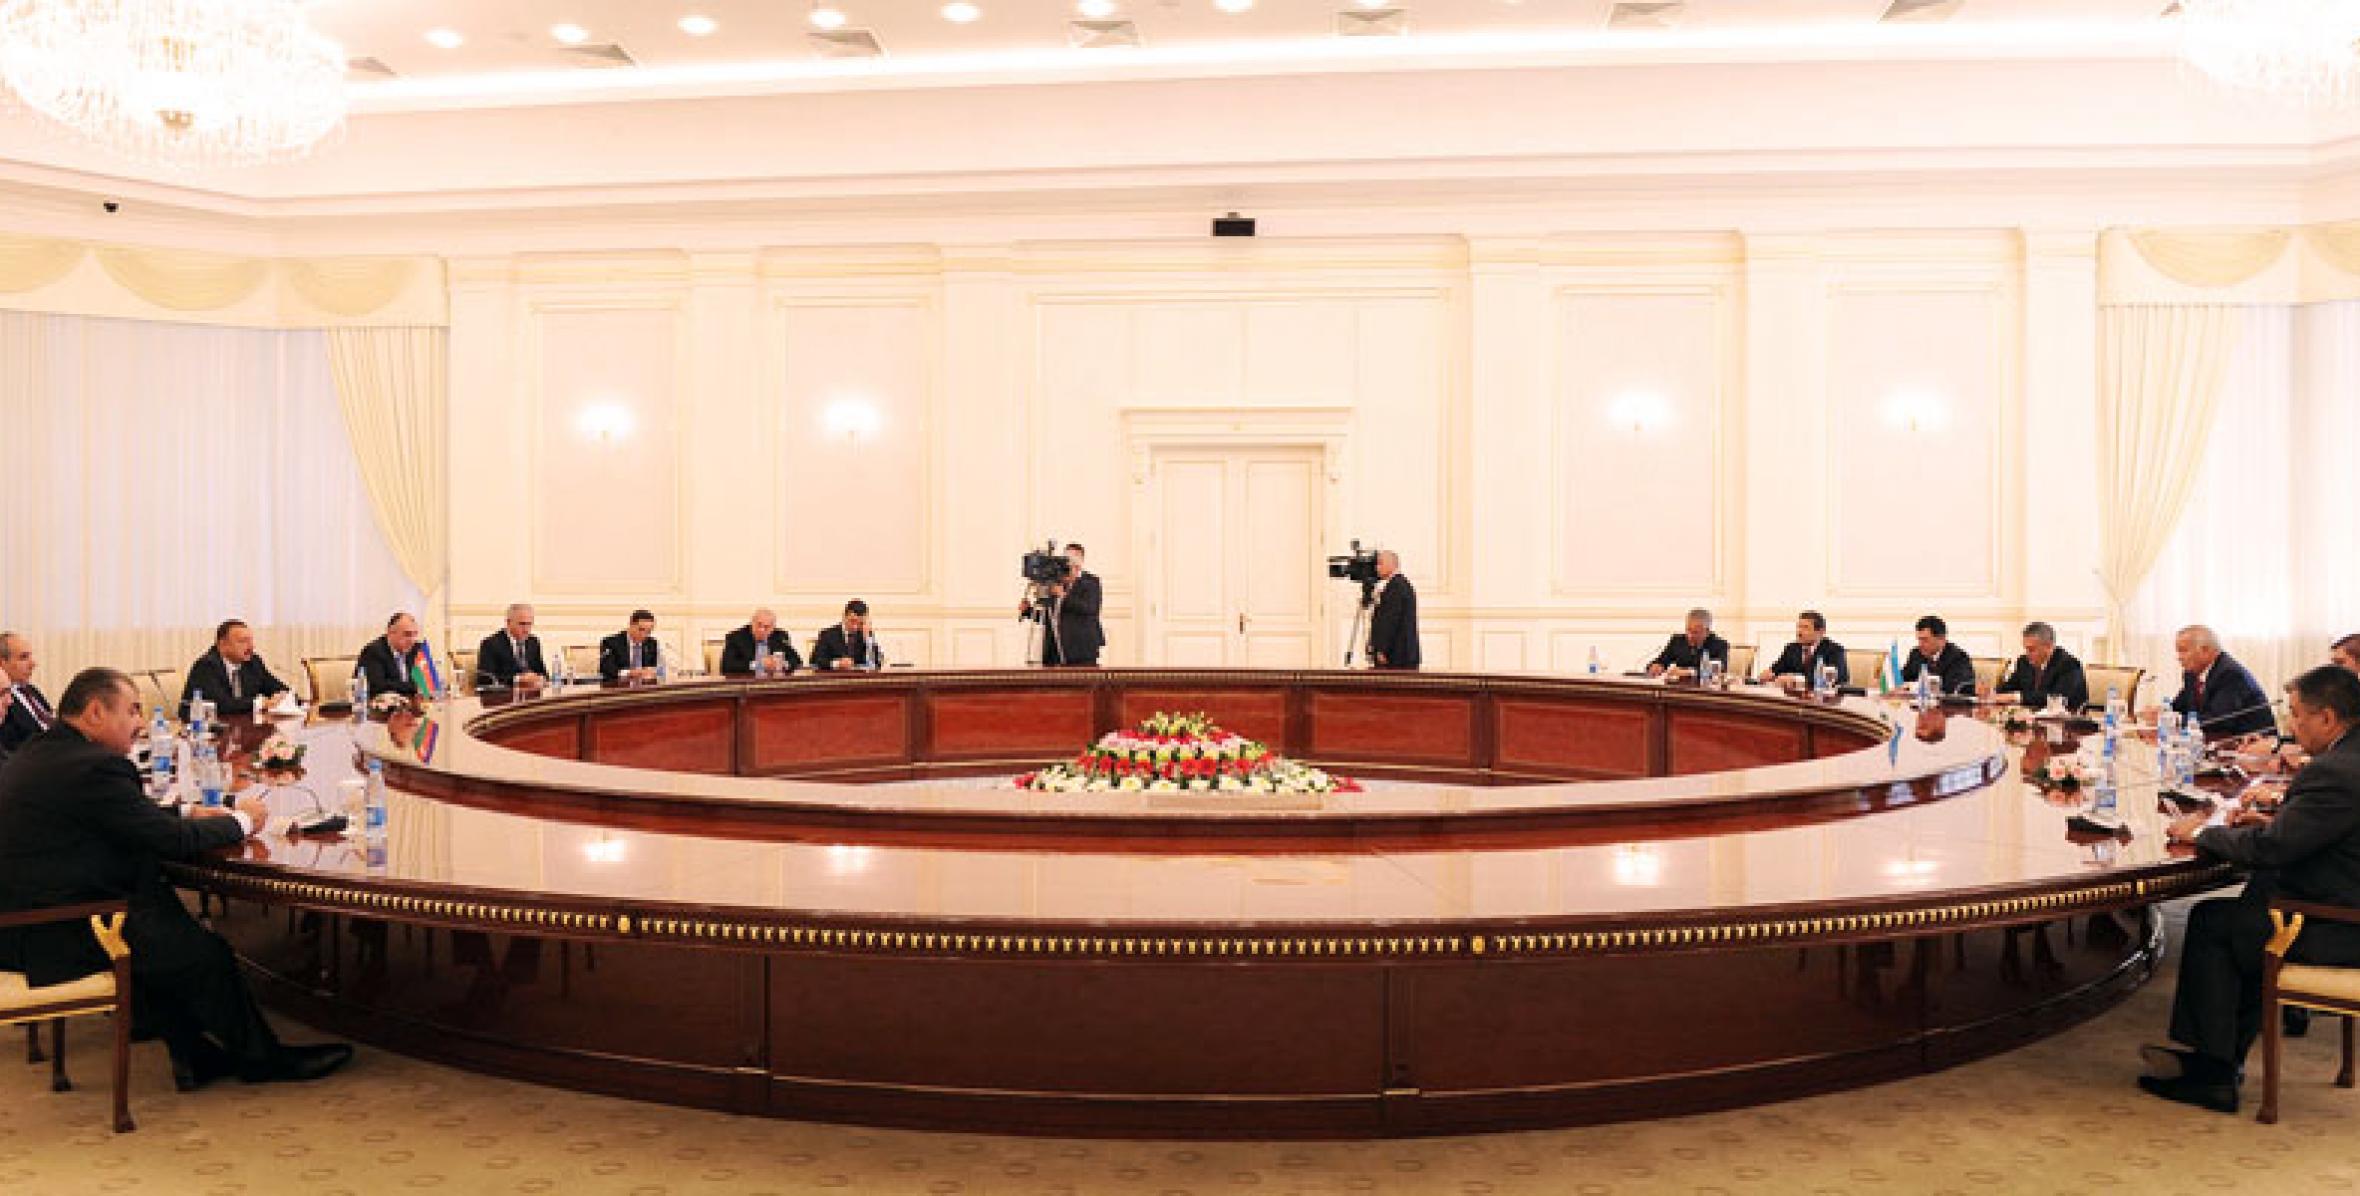 Negotiations between Ilham Aliyev and Islam Karimov in an expanded format